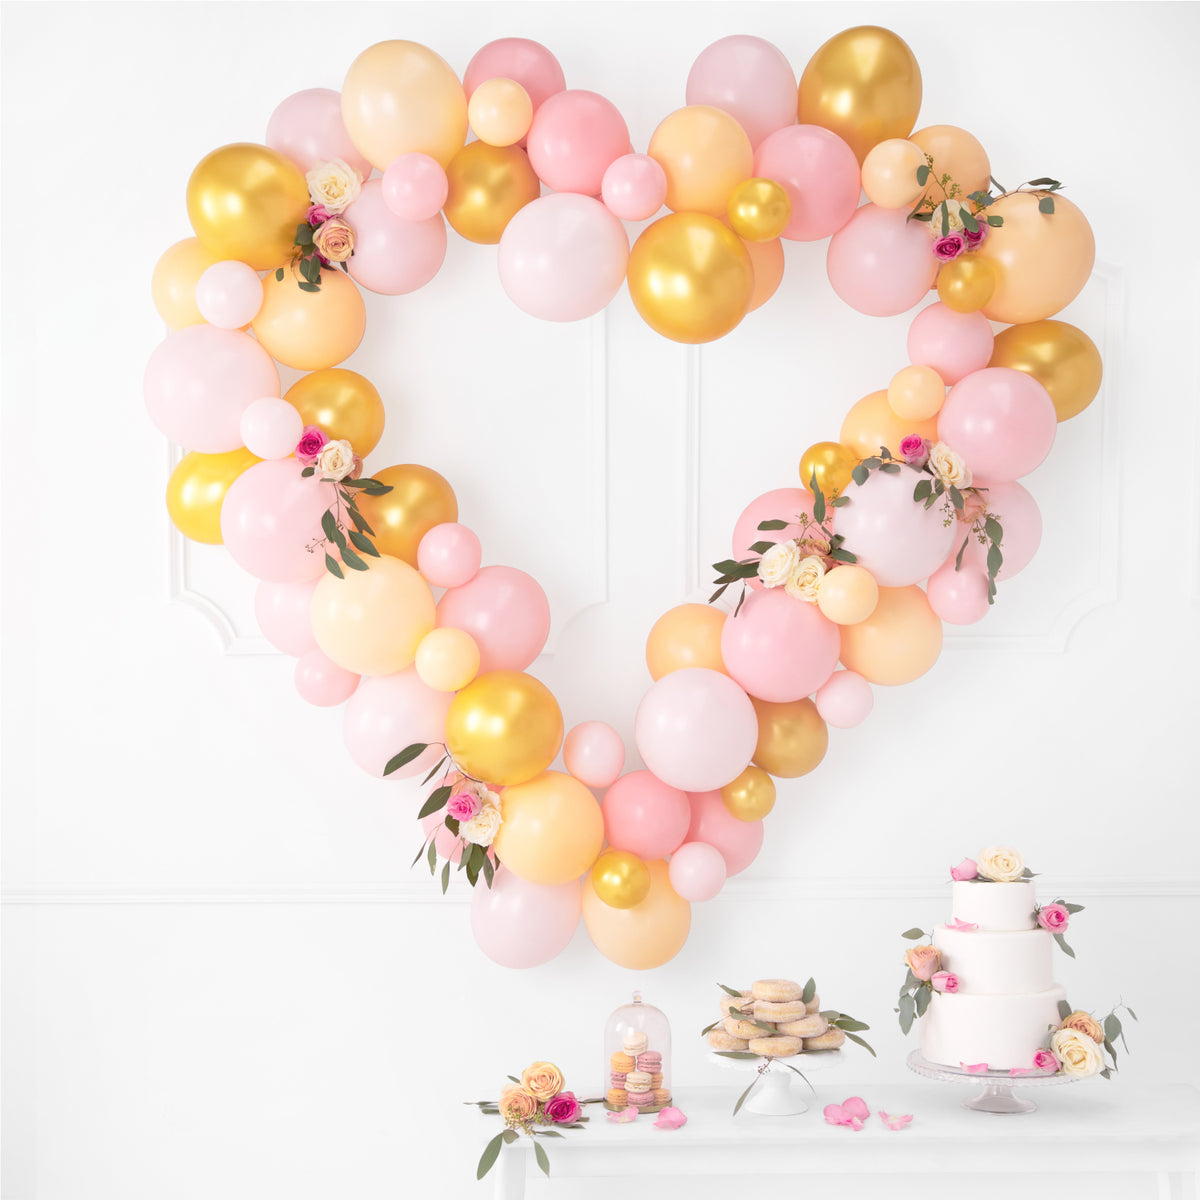 High Quality Pastel Balloon Garland, Pink Balloon Arch, Alice in